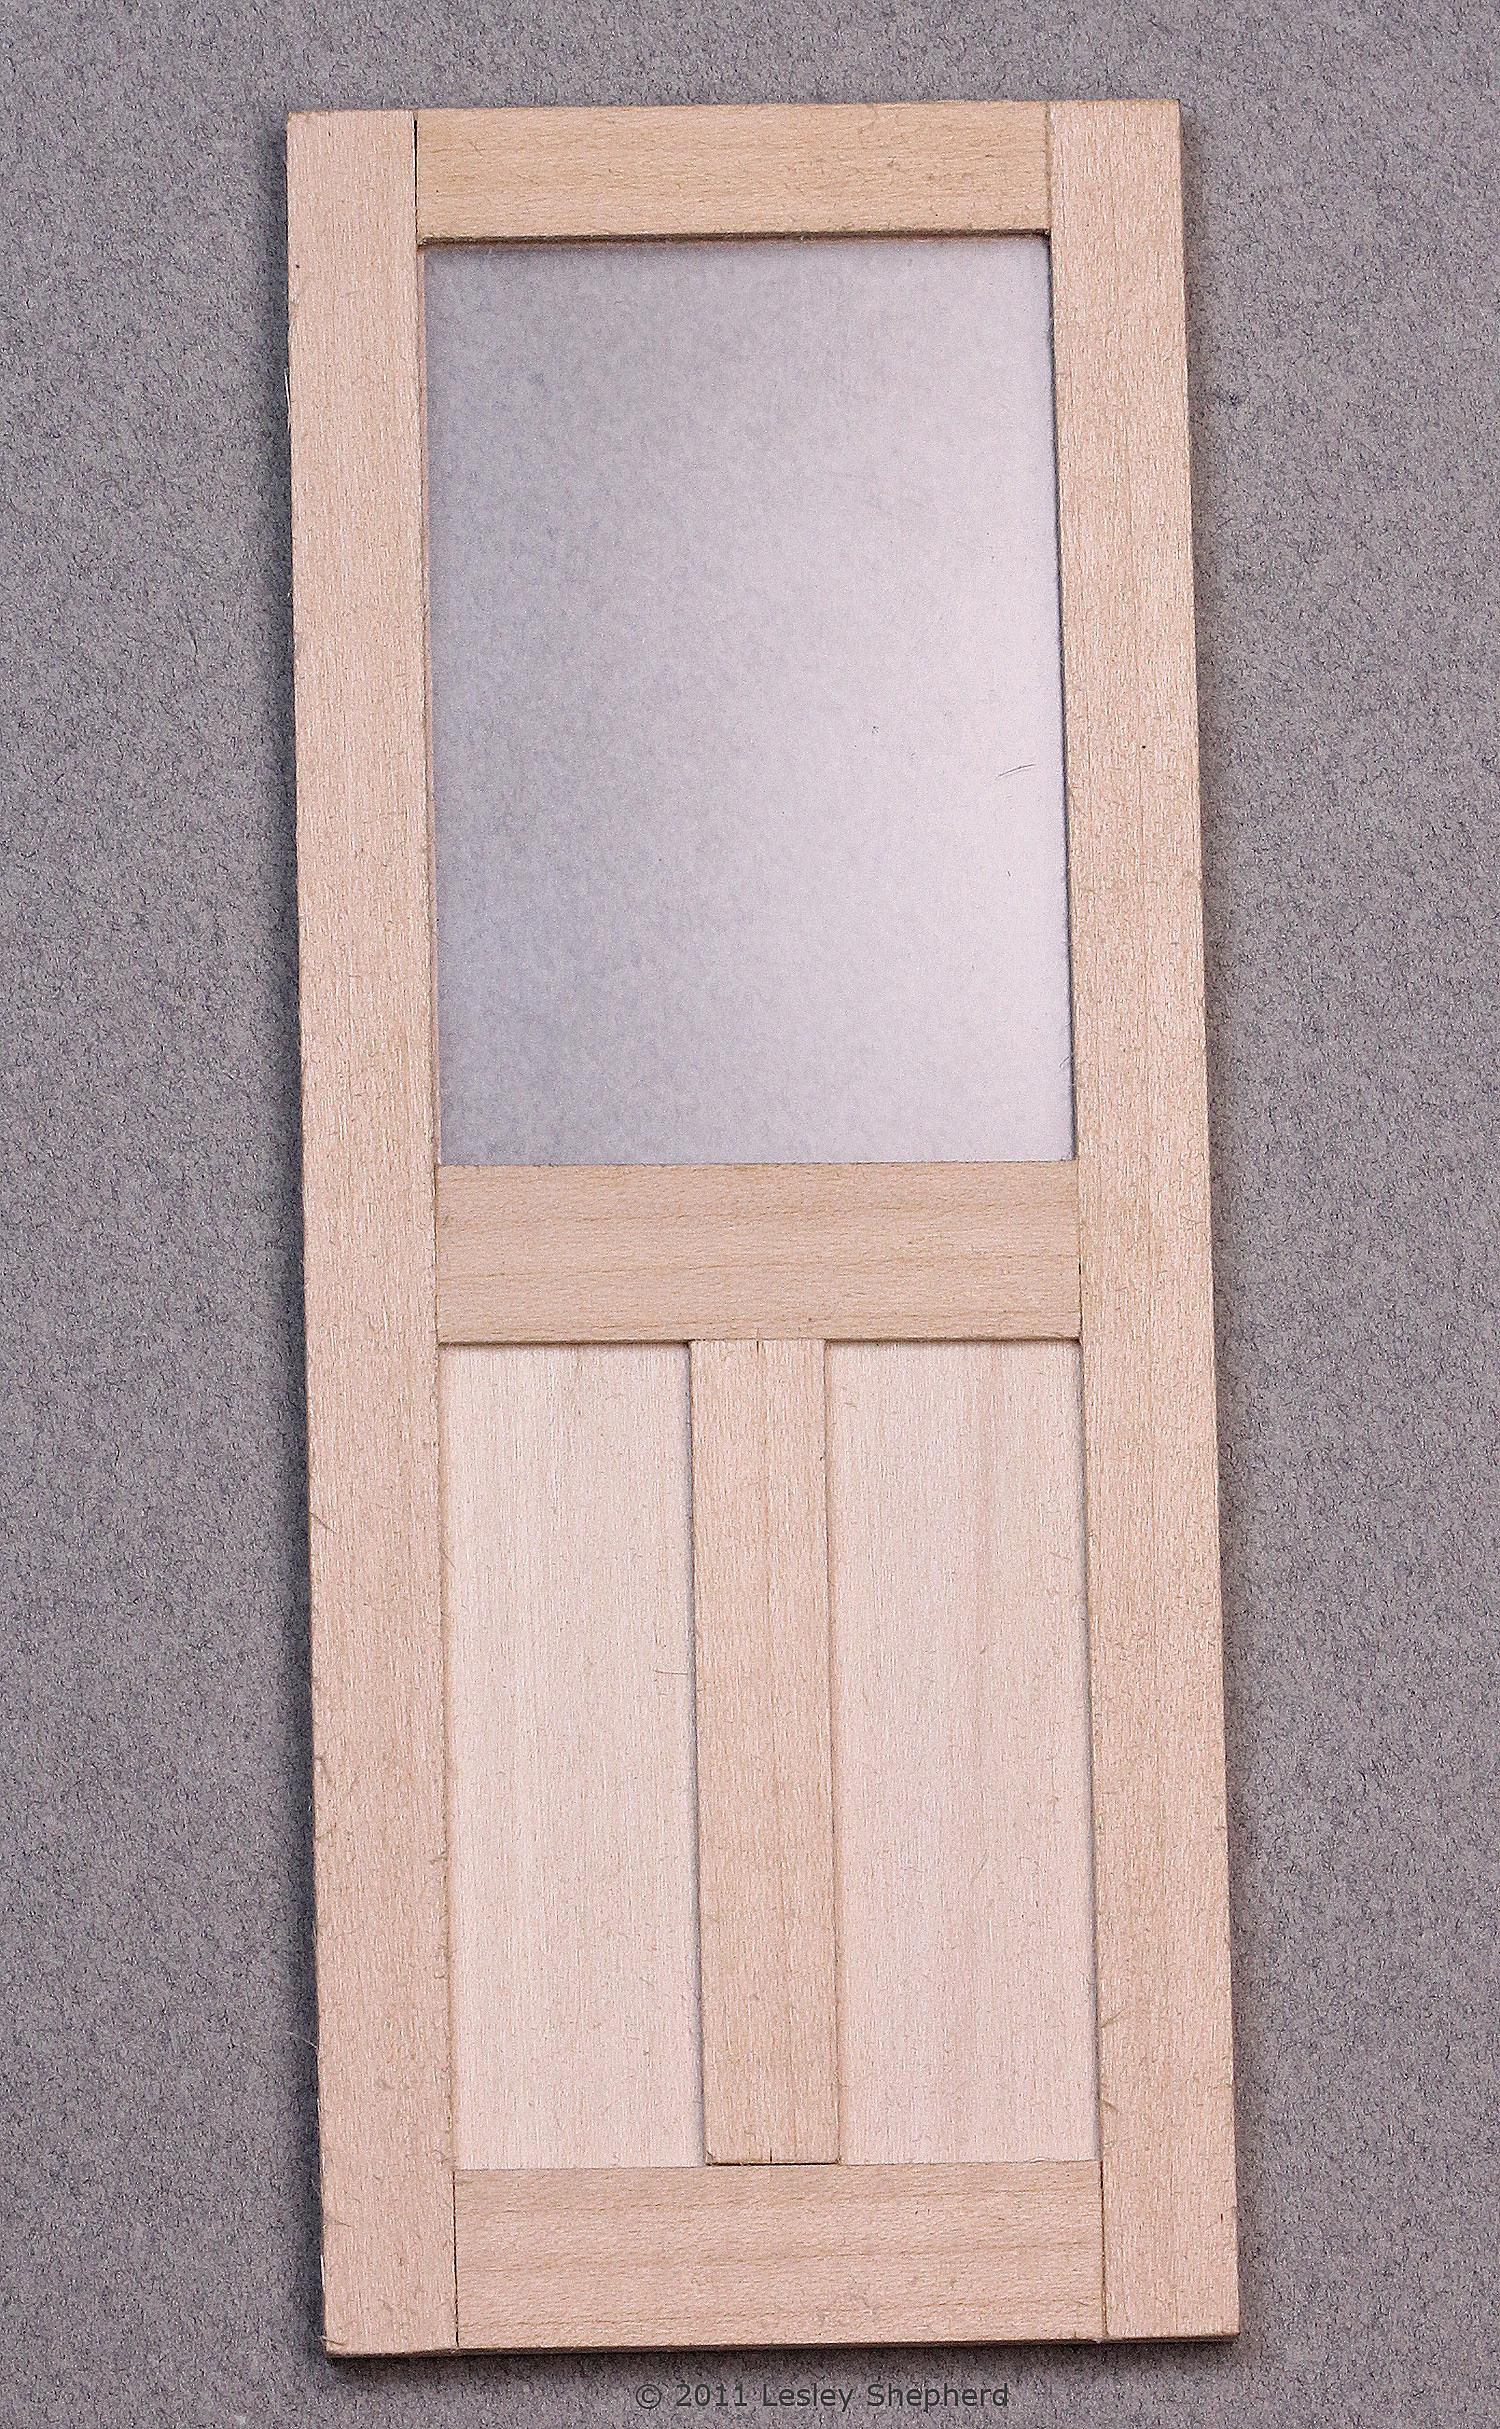 Simple dolls house door with window and panel trim.